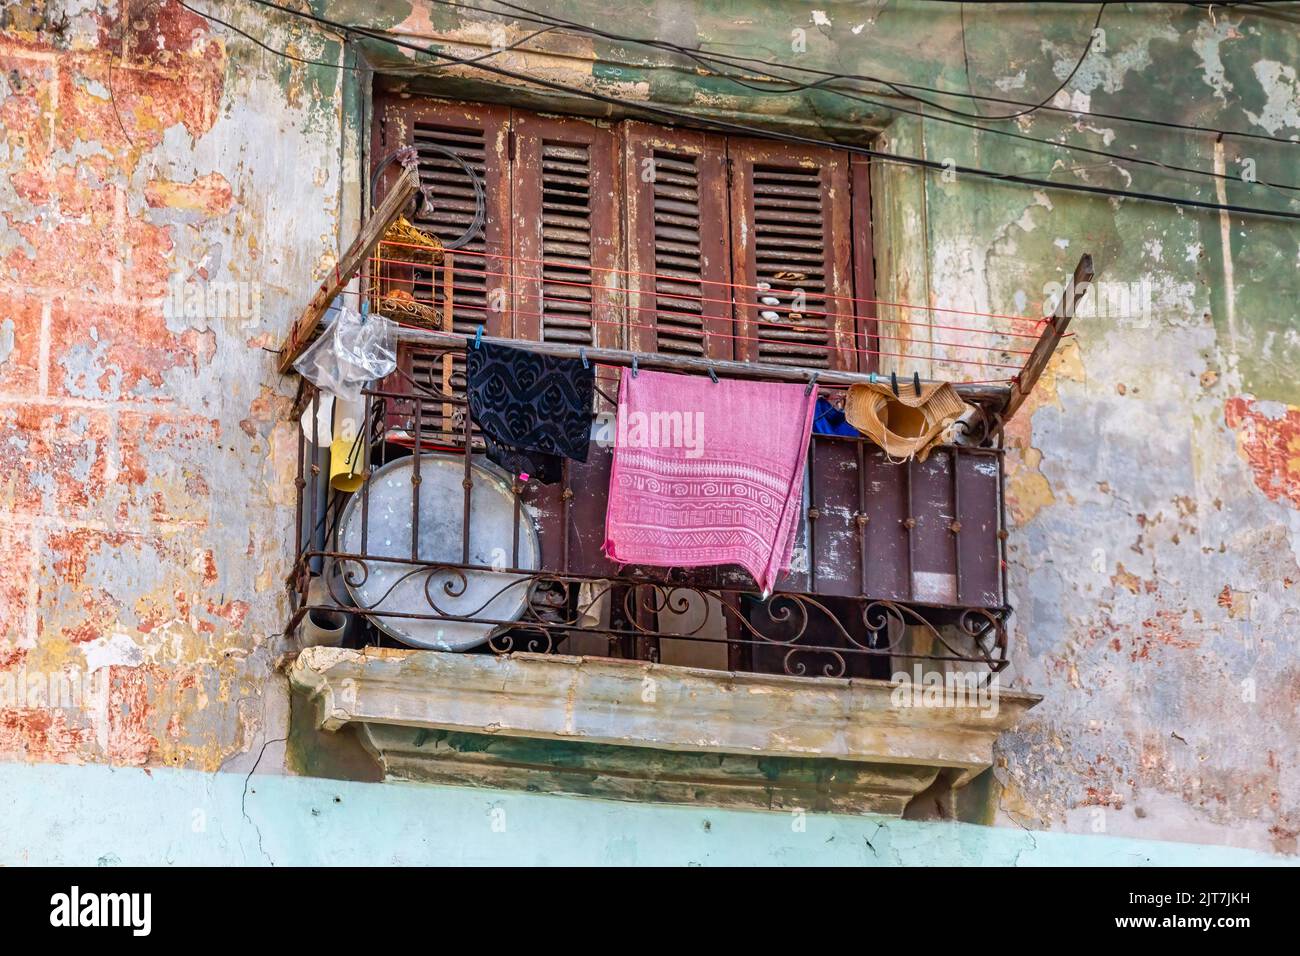 Clothes drying in the railing of a balcony. The exterior wall of the building is weathered and lacking maintenance. The scene is common in the capital Stock Photo